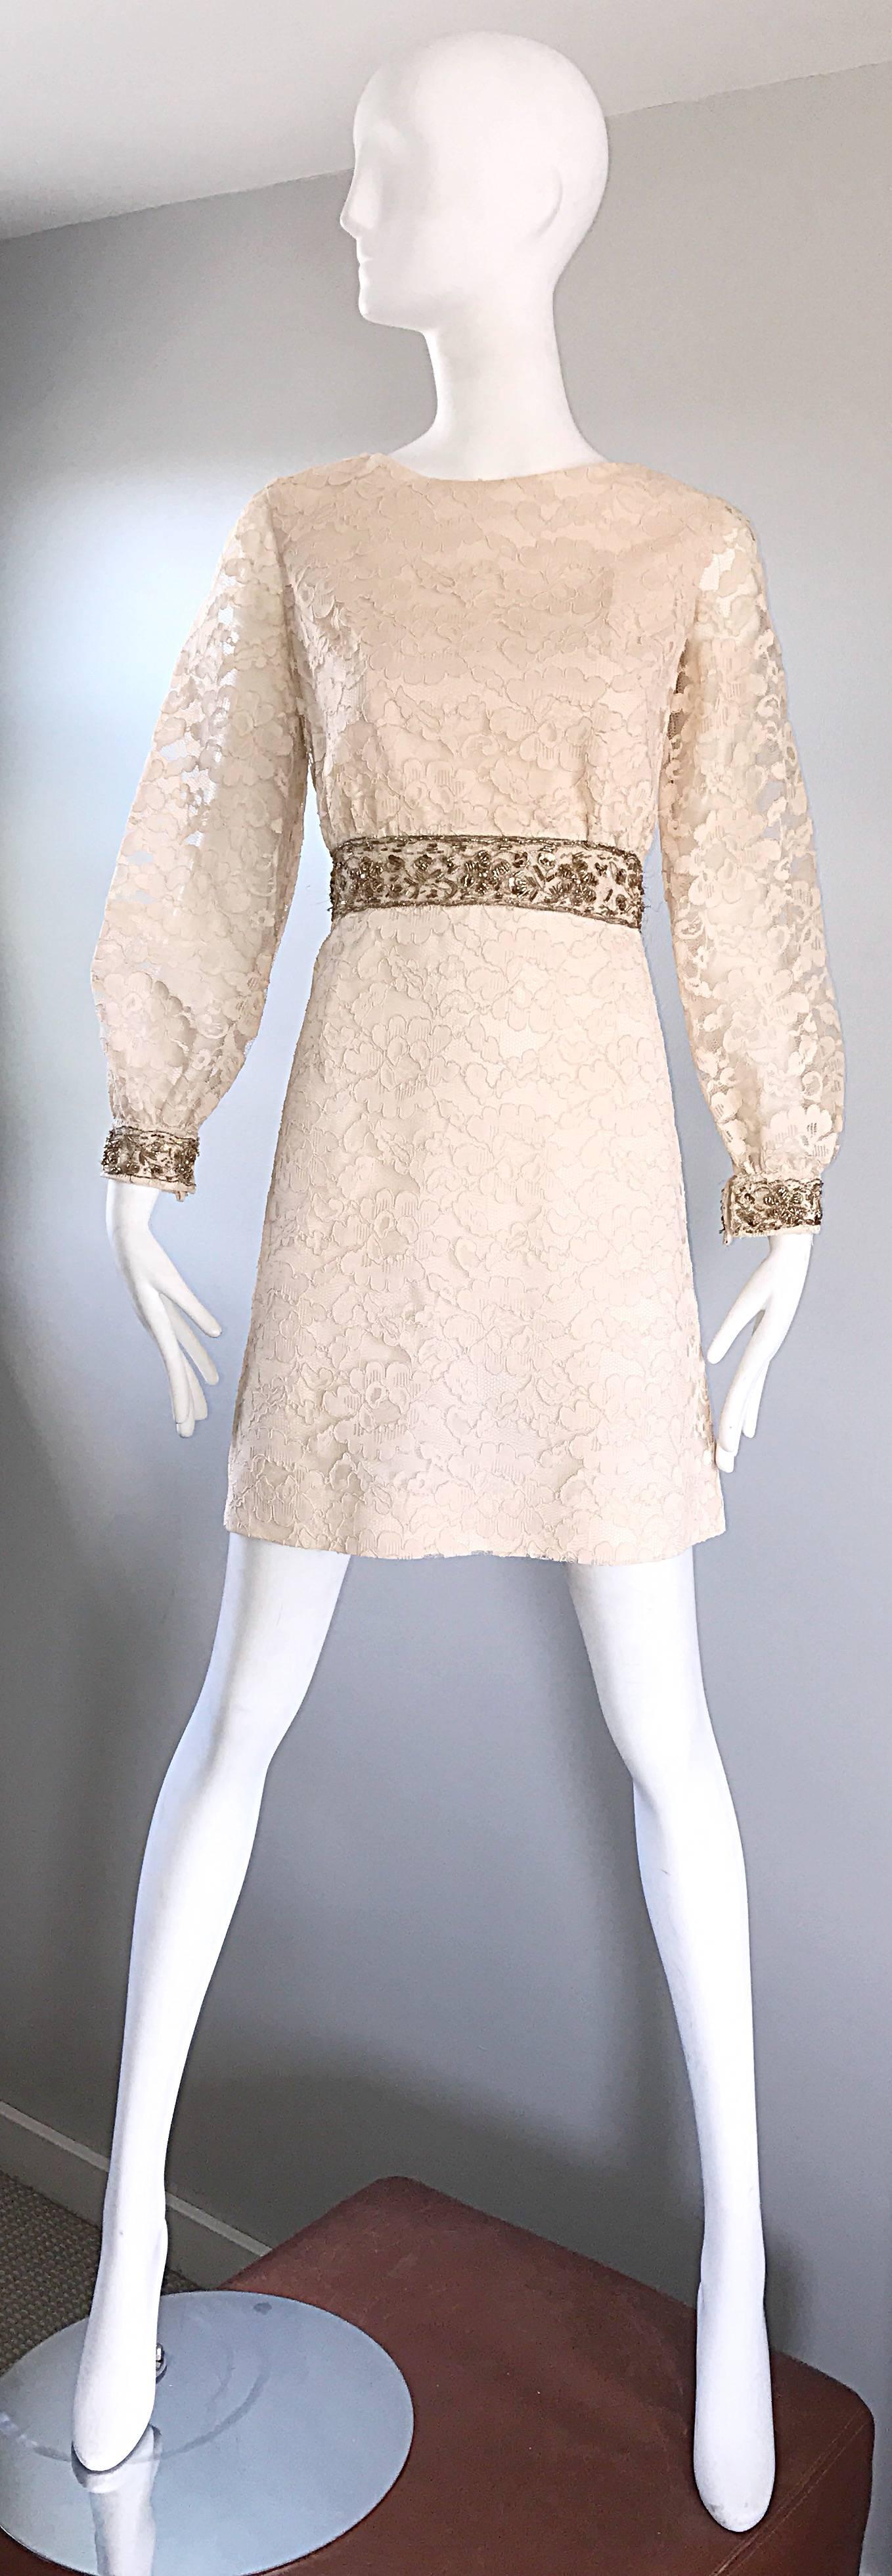 1960s Ivory and Gold Lace + Sequins Mod Vintage A - Line 60s Babydoll Dress For Sale 3